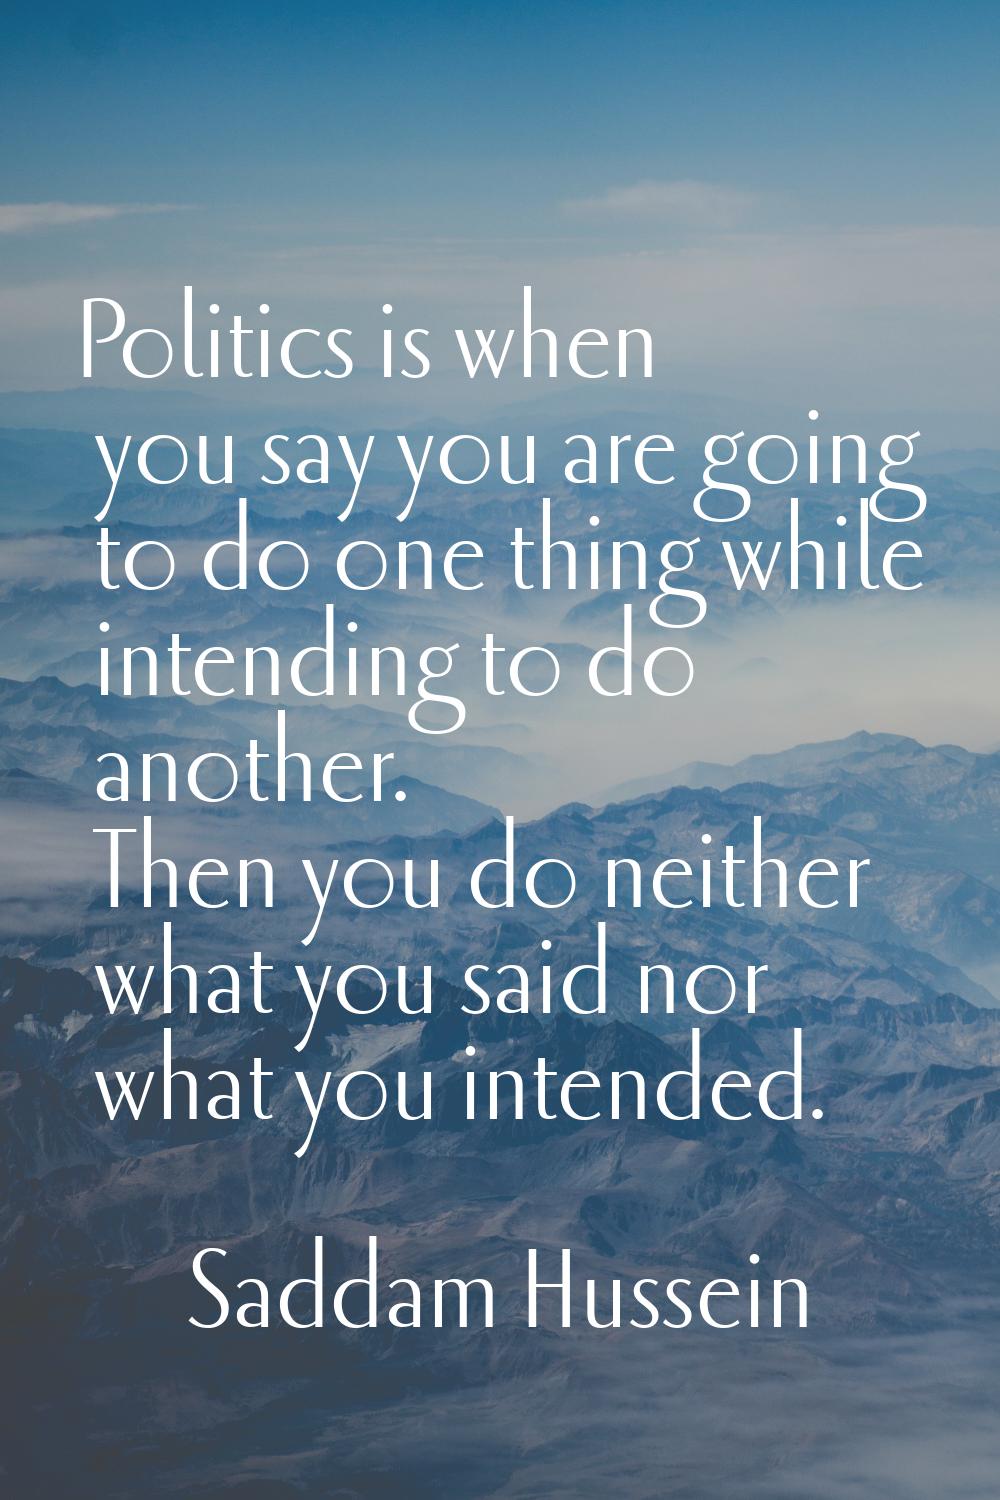 Politics is when you say you are going to do one thing while intending to do another. Then you do n